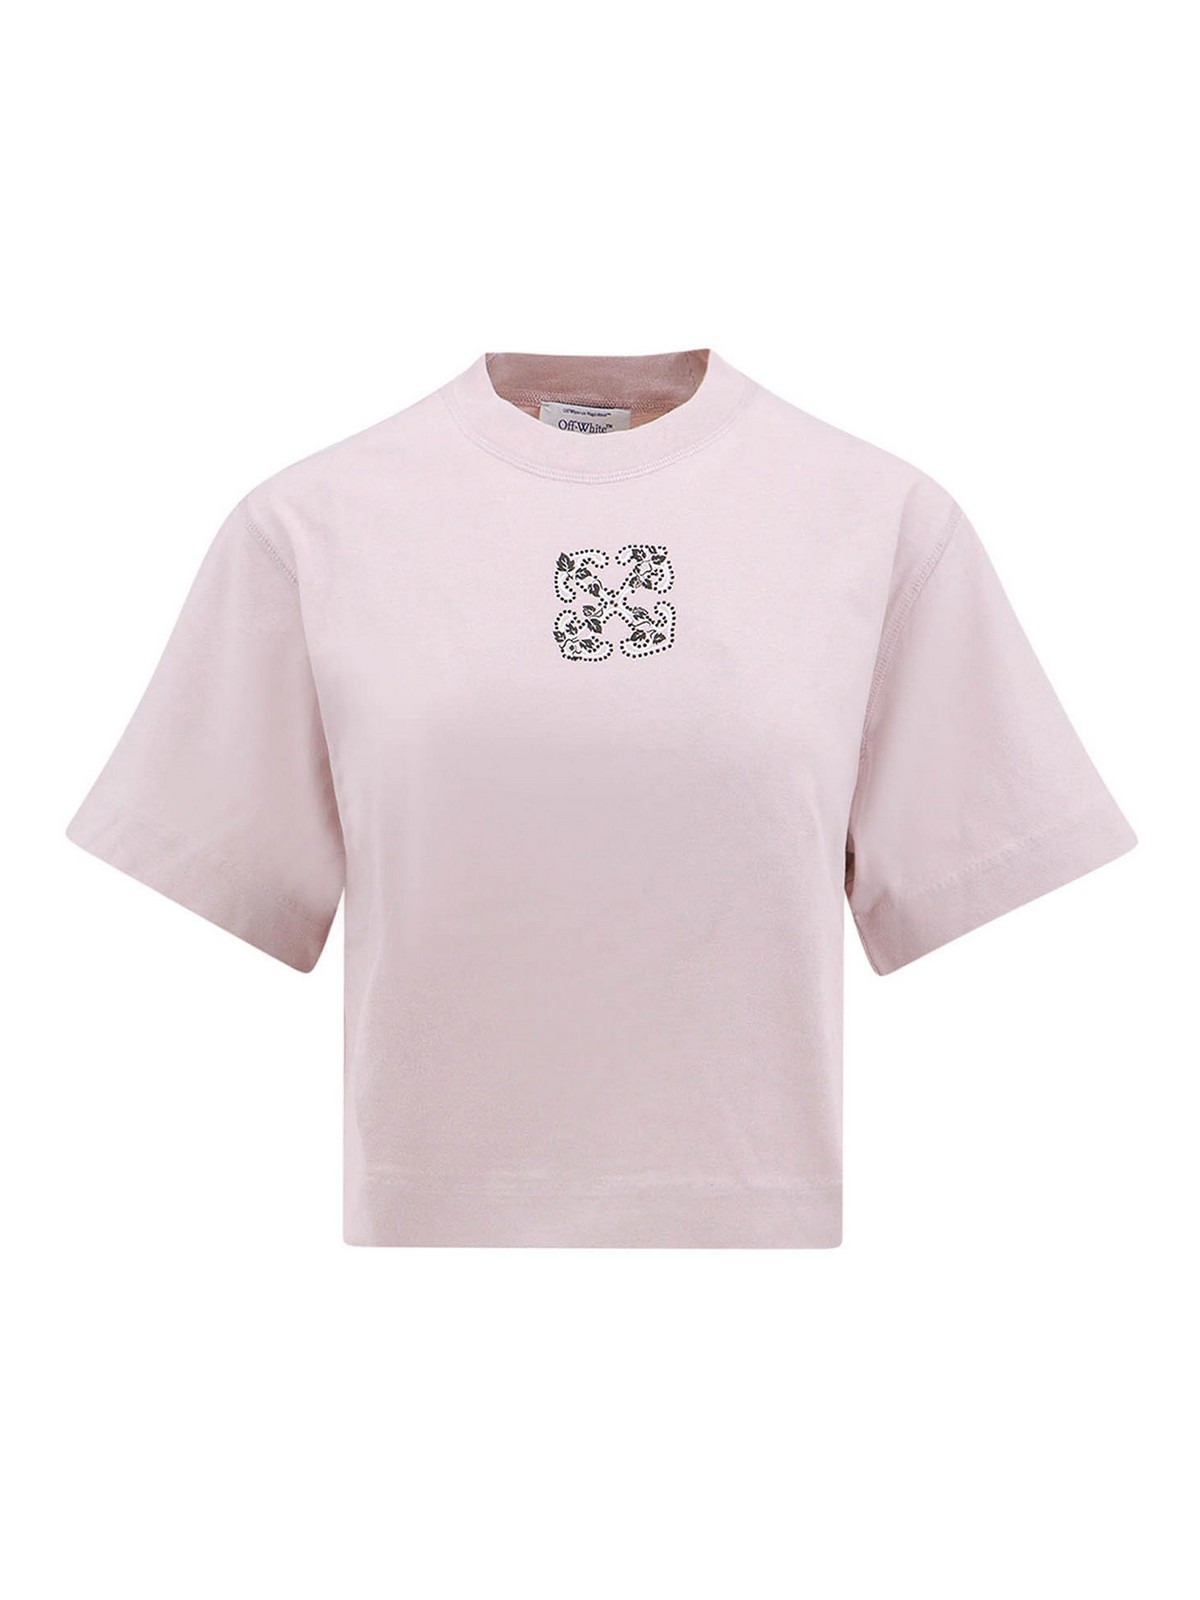 OFF-WHITE COTTON T-SHIRT WITH BLING LEAVES MOTIF